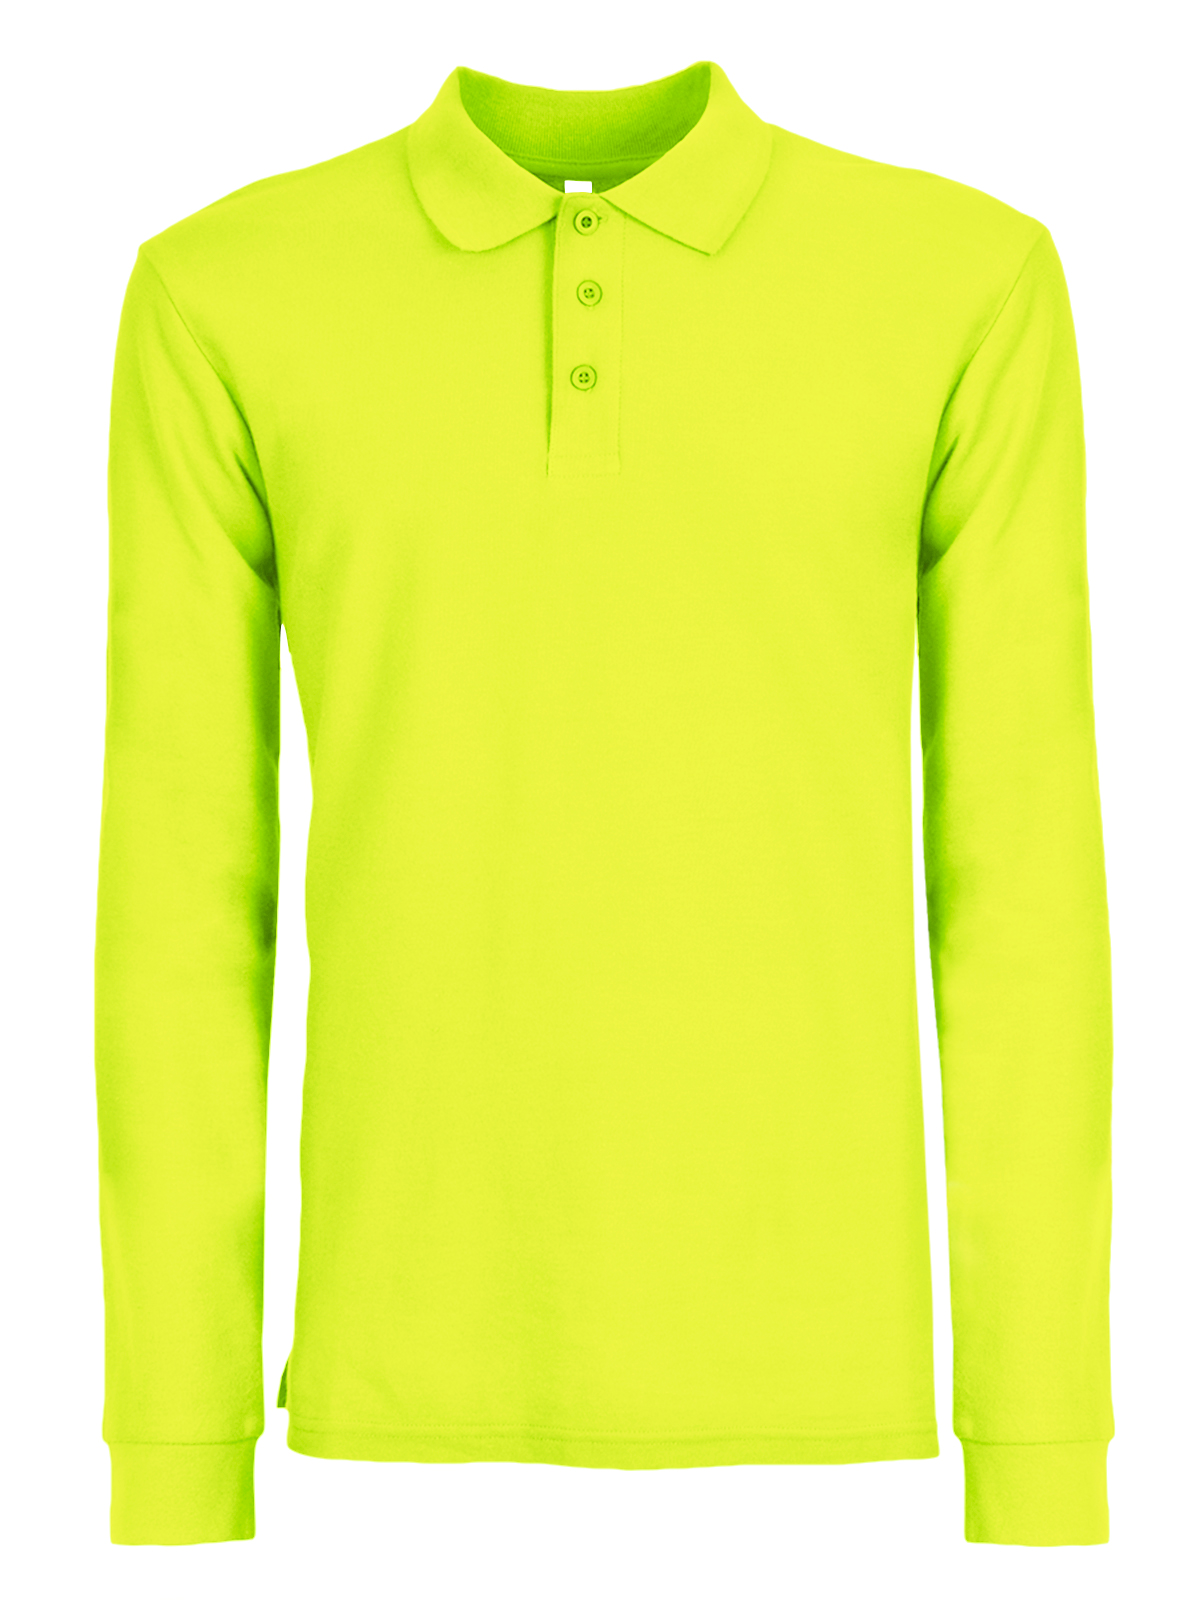 evolution-polo-l-s-safety-yellow.webp